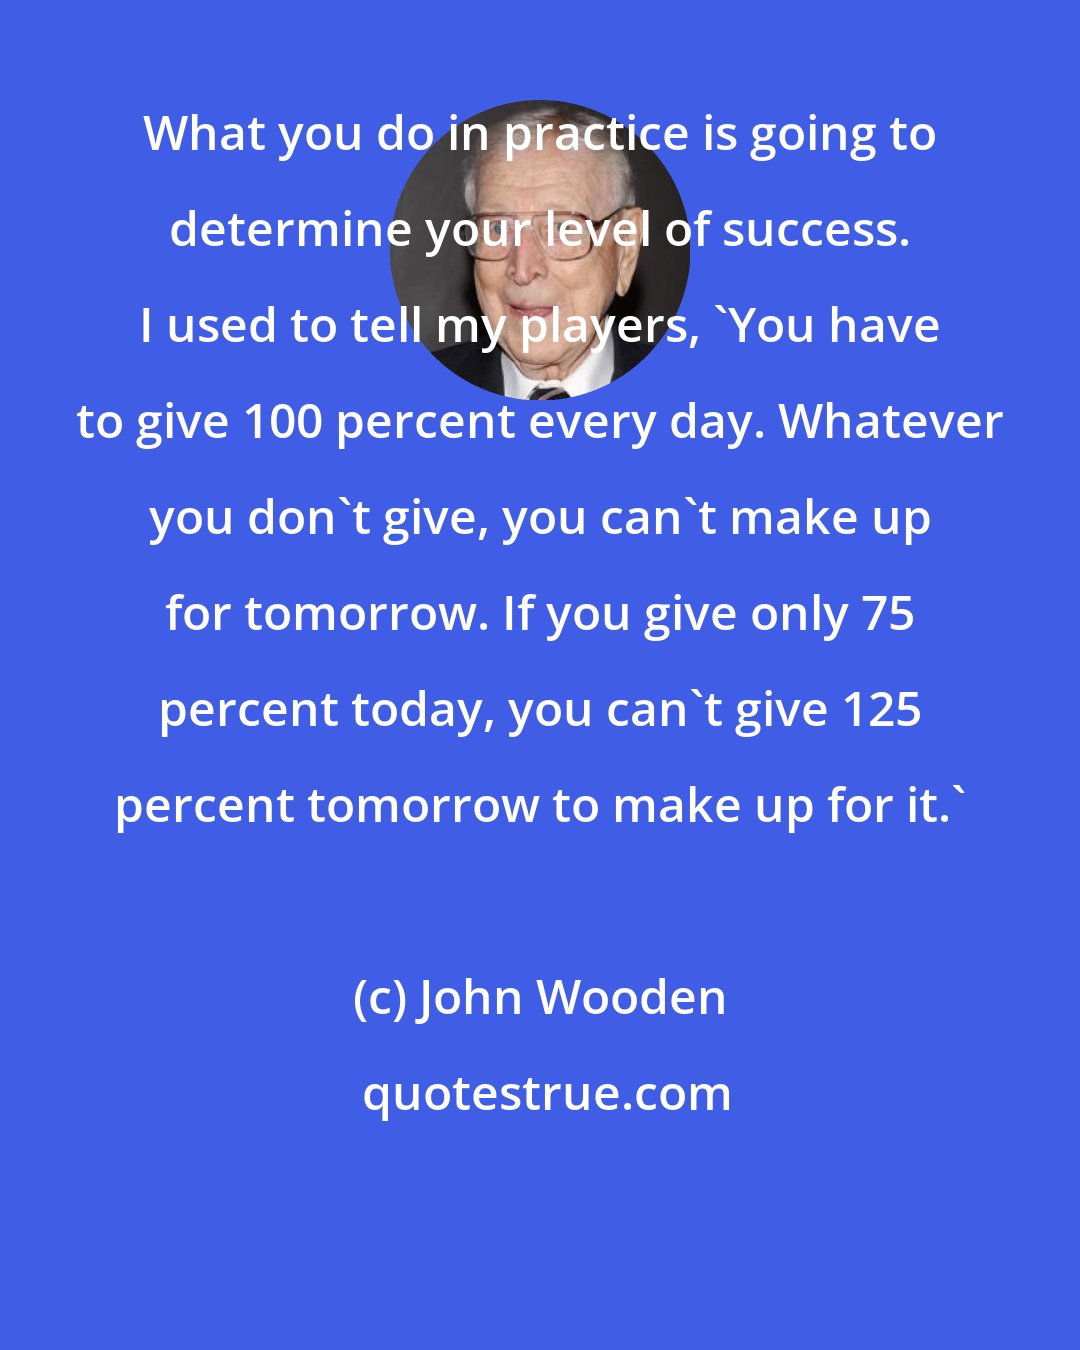 John Wooden: What you do in practice is going to determine your level of success. I used to tell my players, 'You have to give 100 percent every day. Whatever you don't give, you can't make up for tomorrow. If you give only 75 percent today, you can't give 125 percent tomorrow to make up for it.'